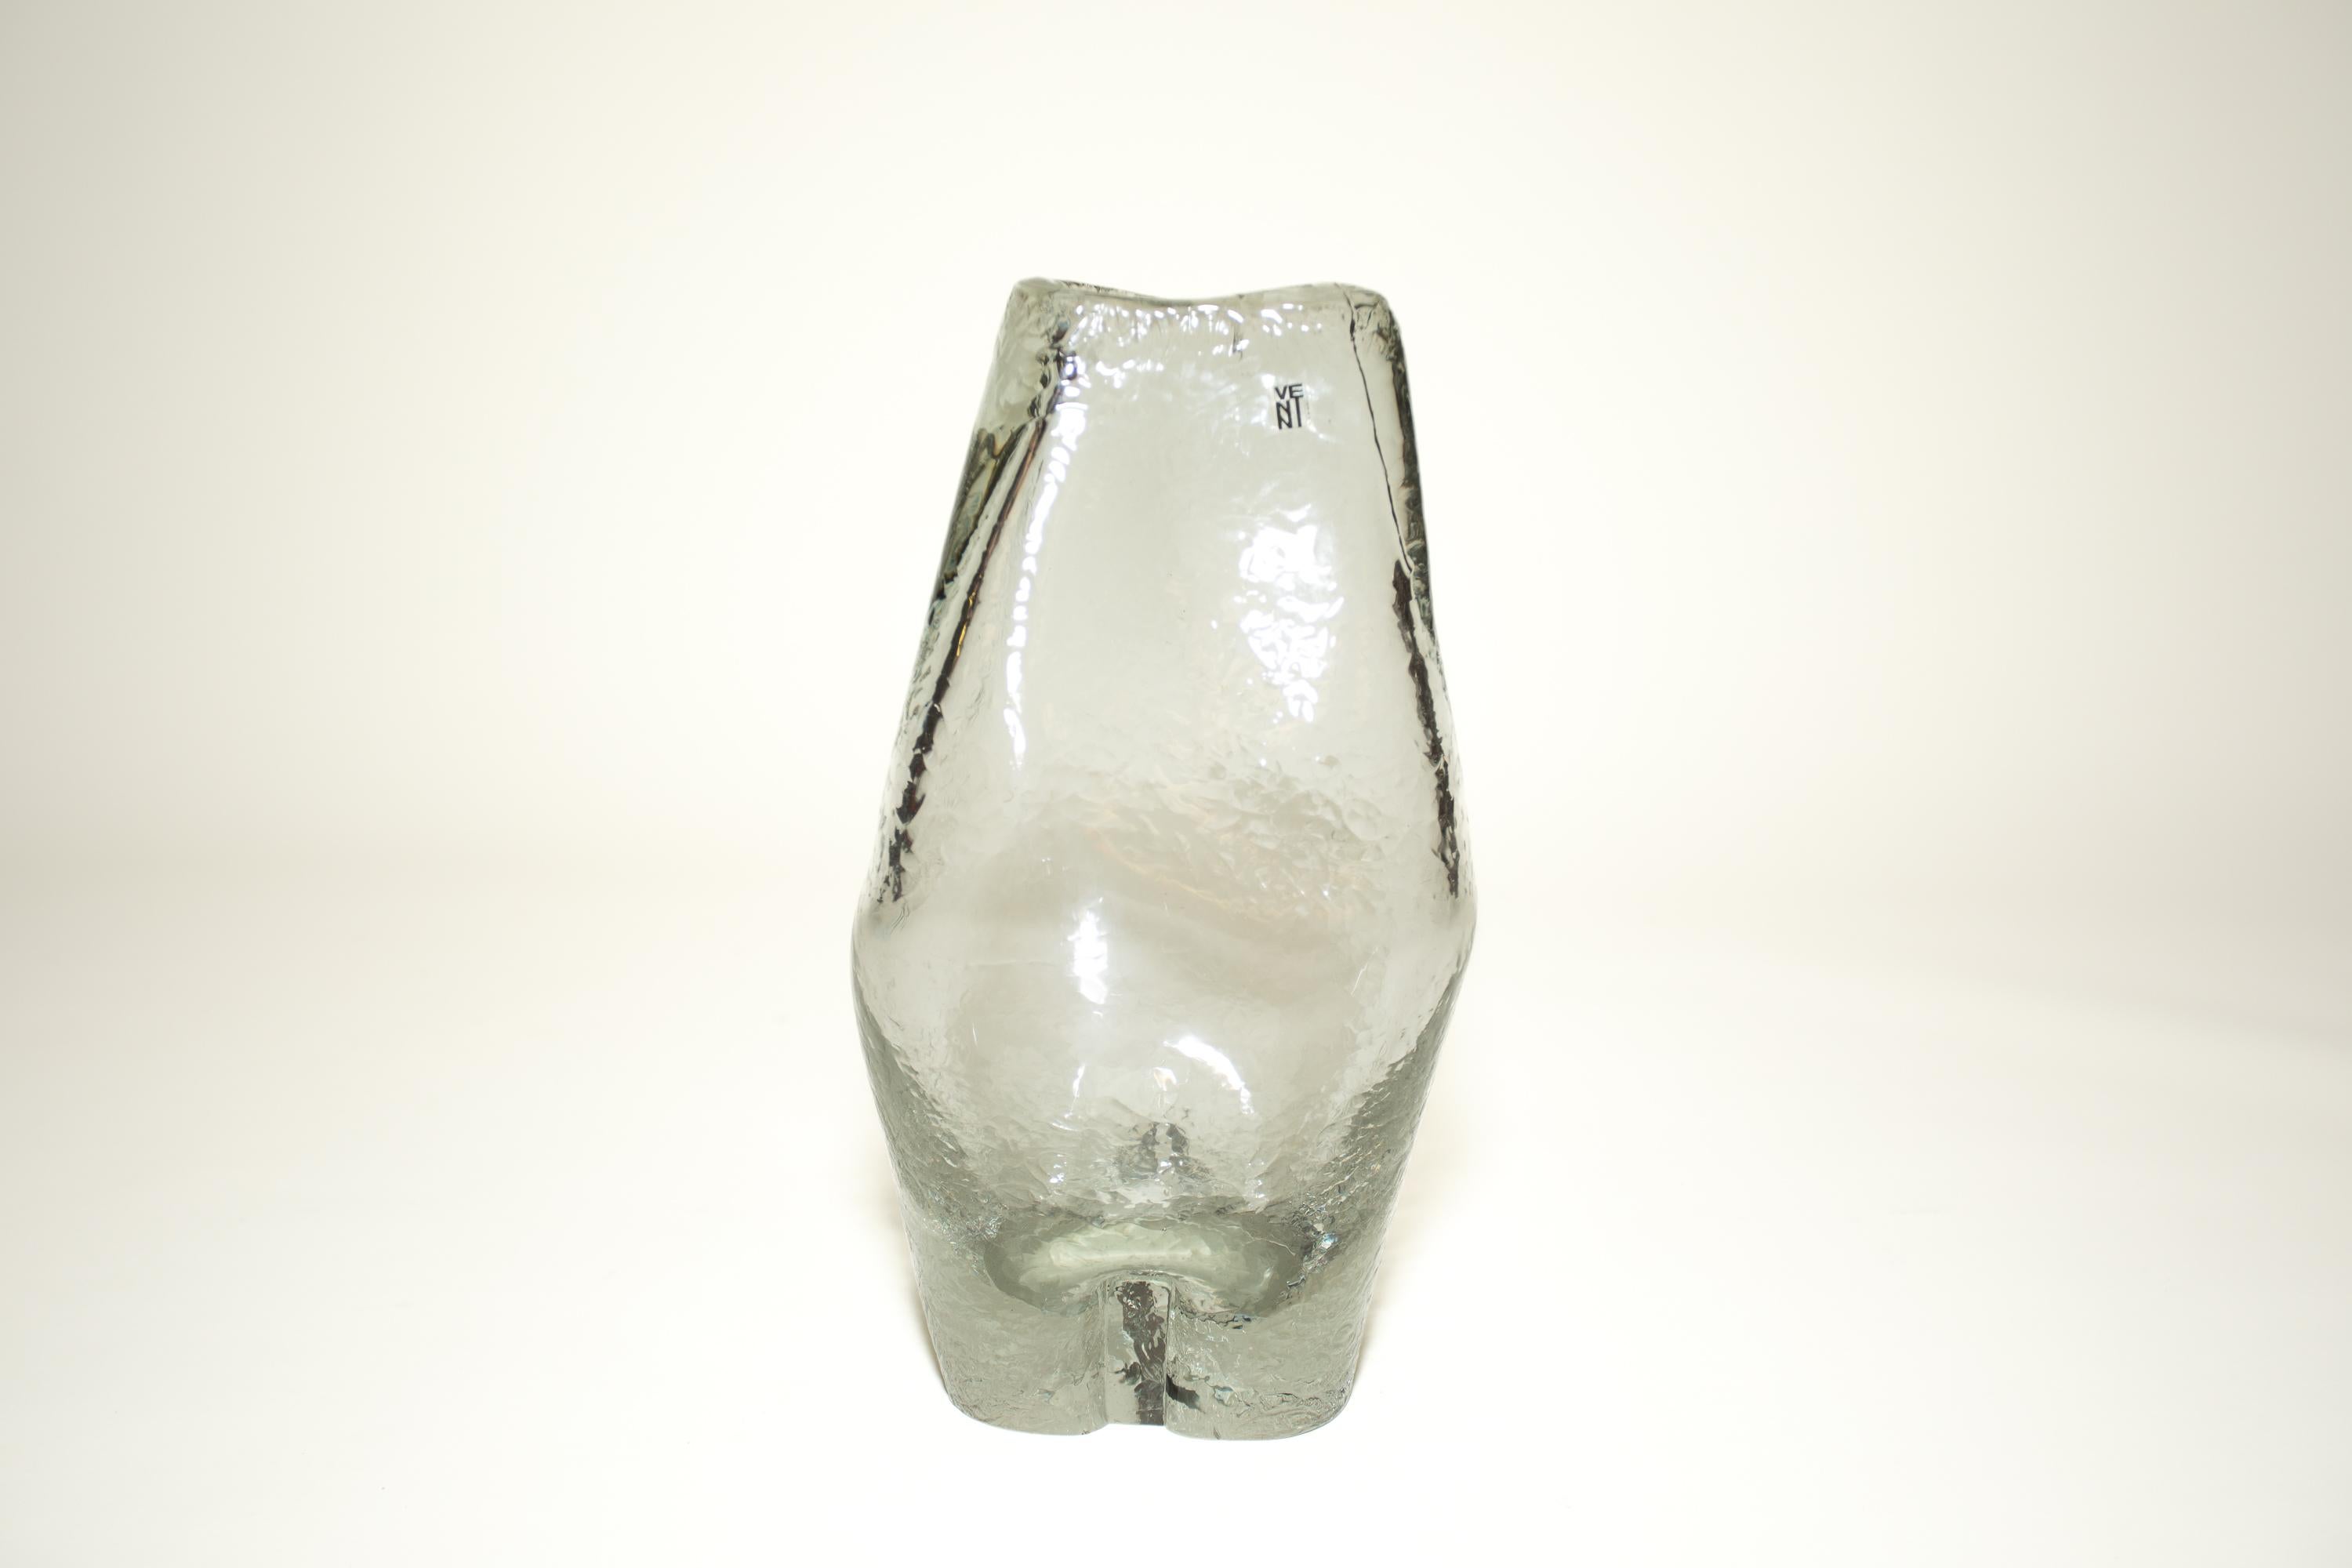 An original Venini Vase in Clear/Gray Textured Glass.
A large Vase in the form of of a Female torso.
Original Venini sticker and engraved Venini/ Italia signature.